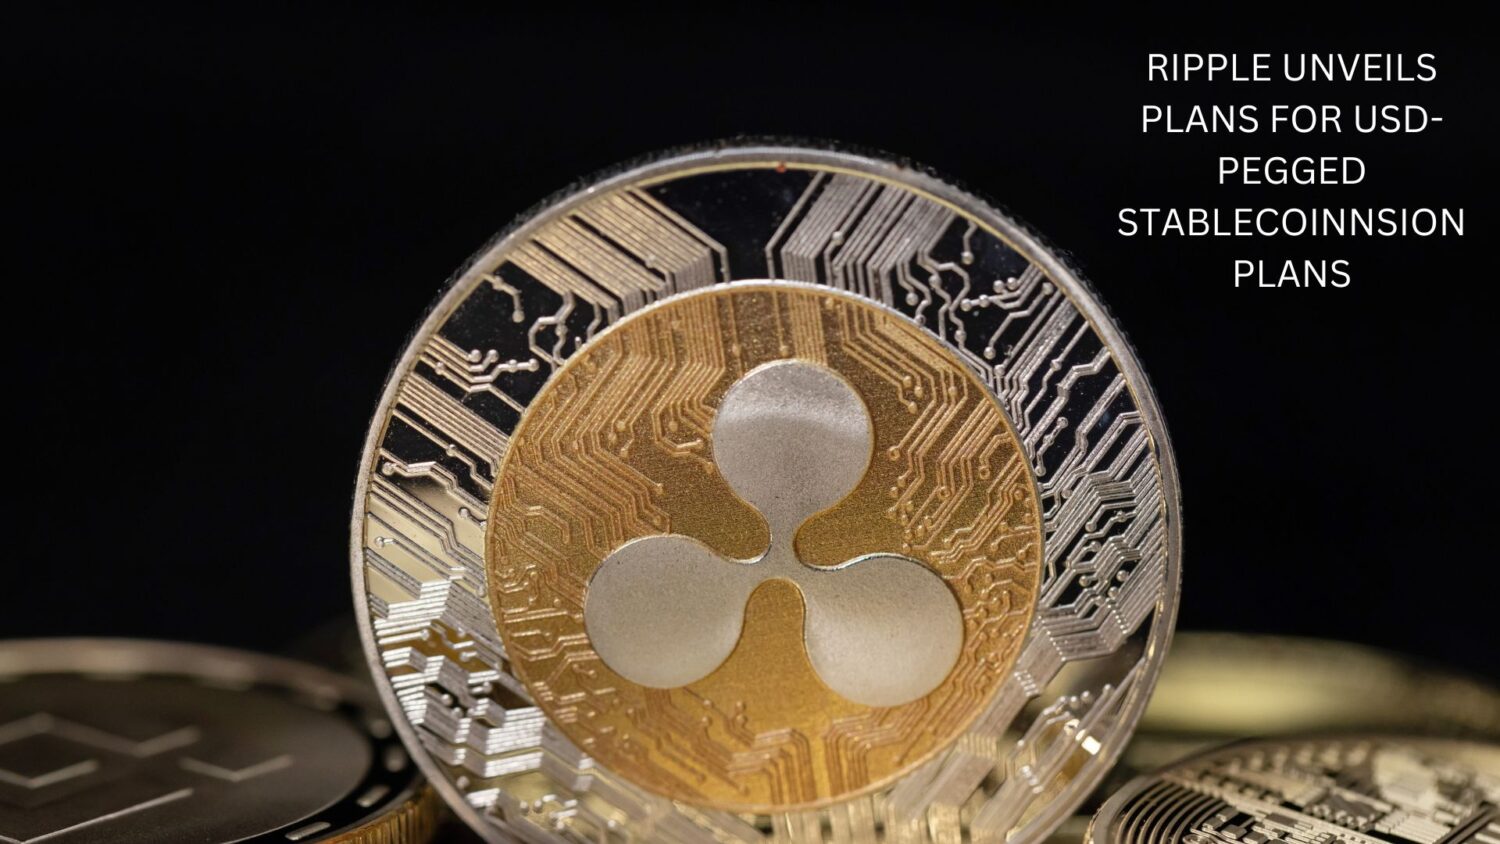 Ripple Unveils Plans For Usd-Pegged Stablecoin